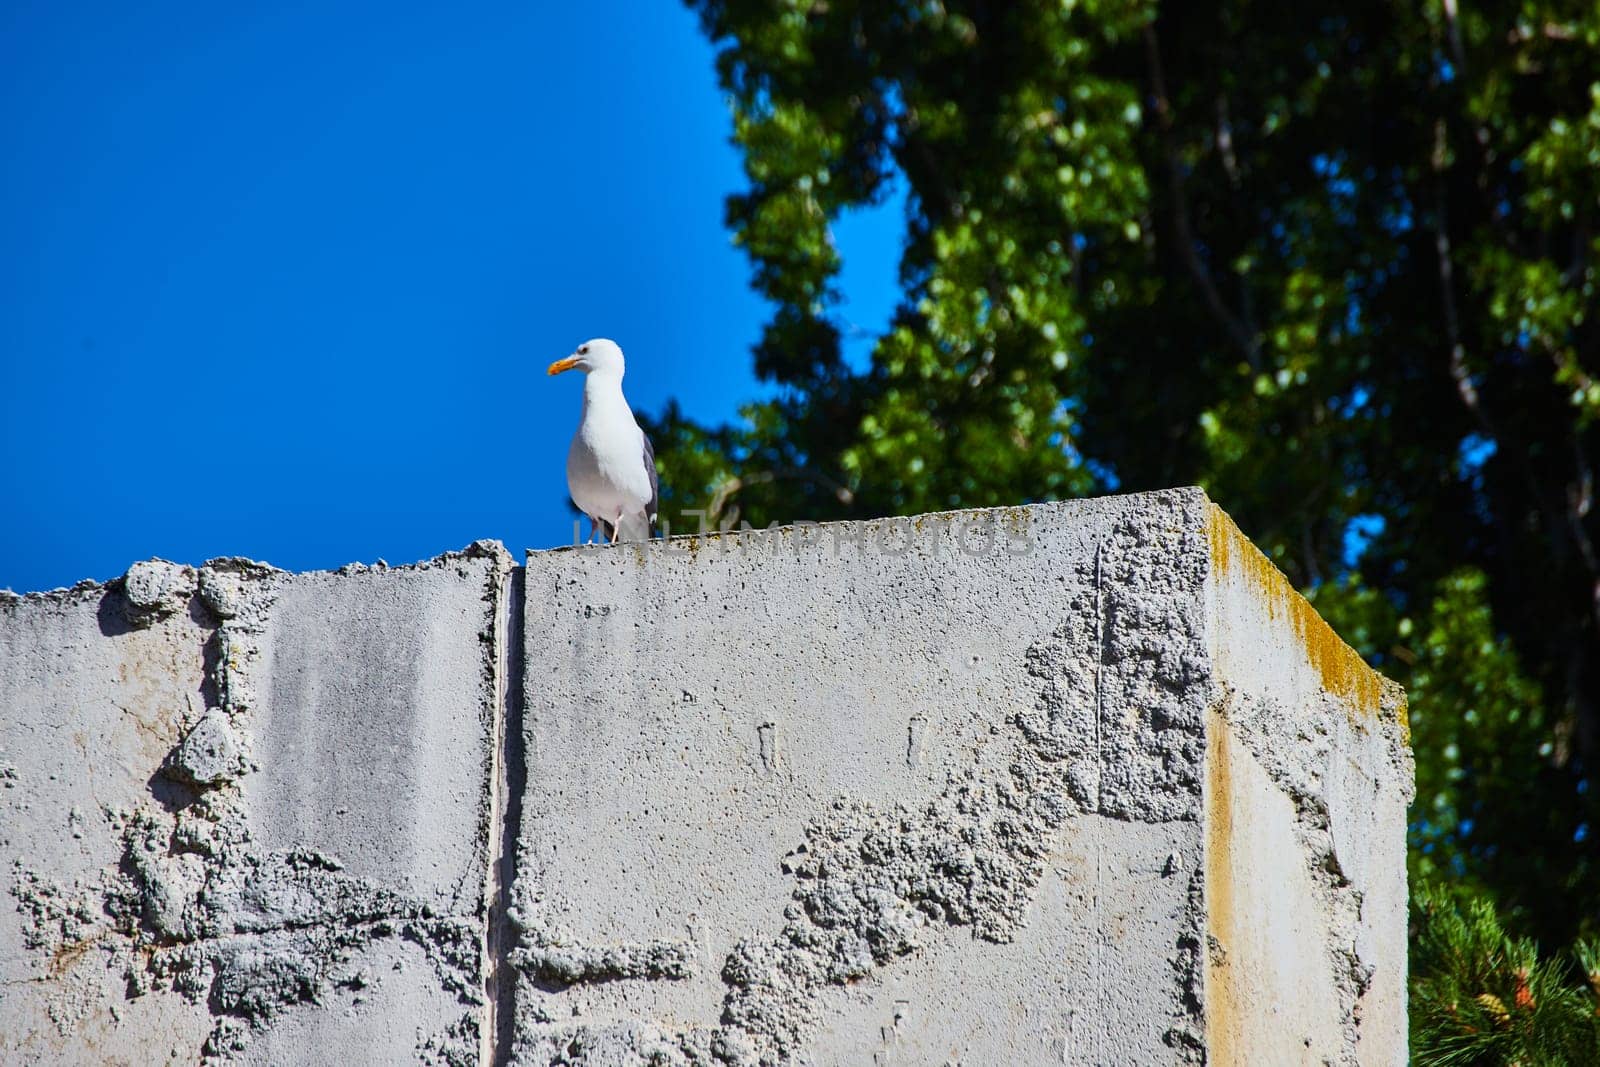 Lone seagull stands atop corner piece of textured concrete block with tree and blue sky background by njproductions